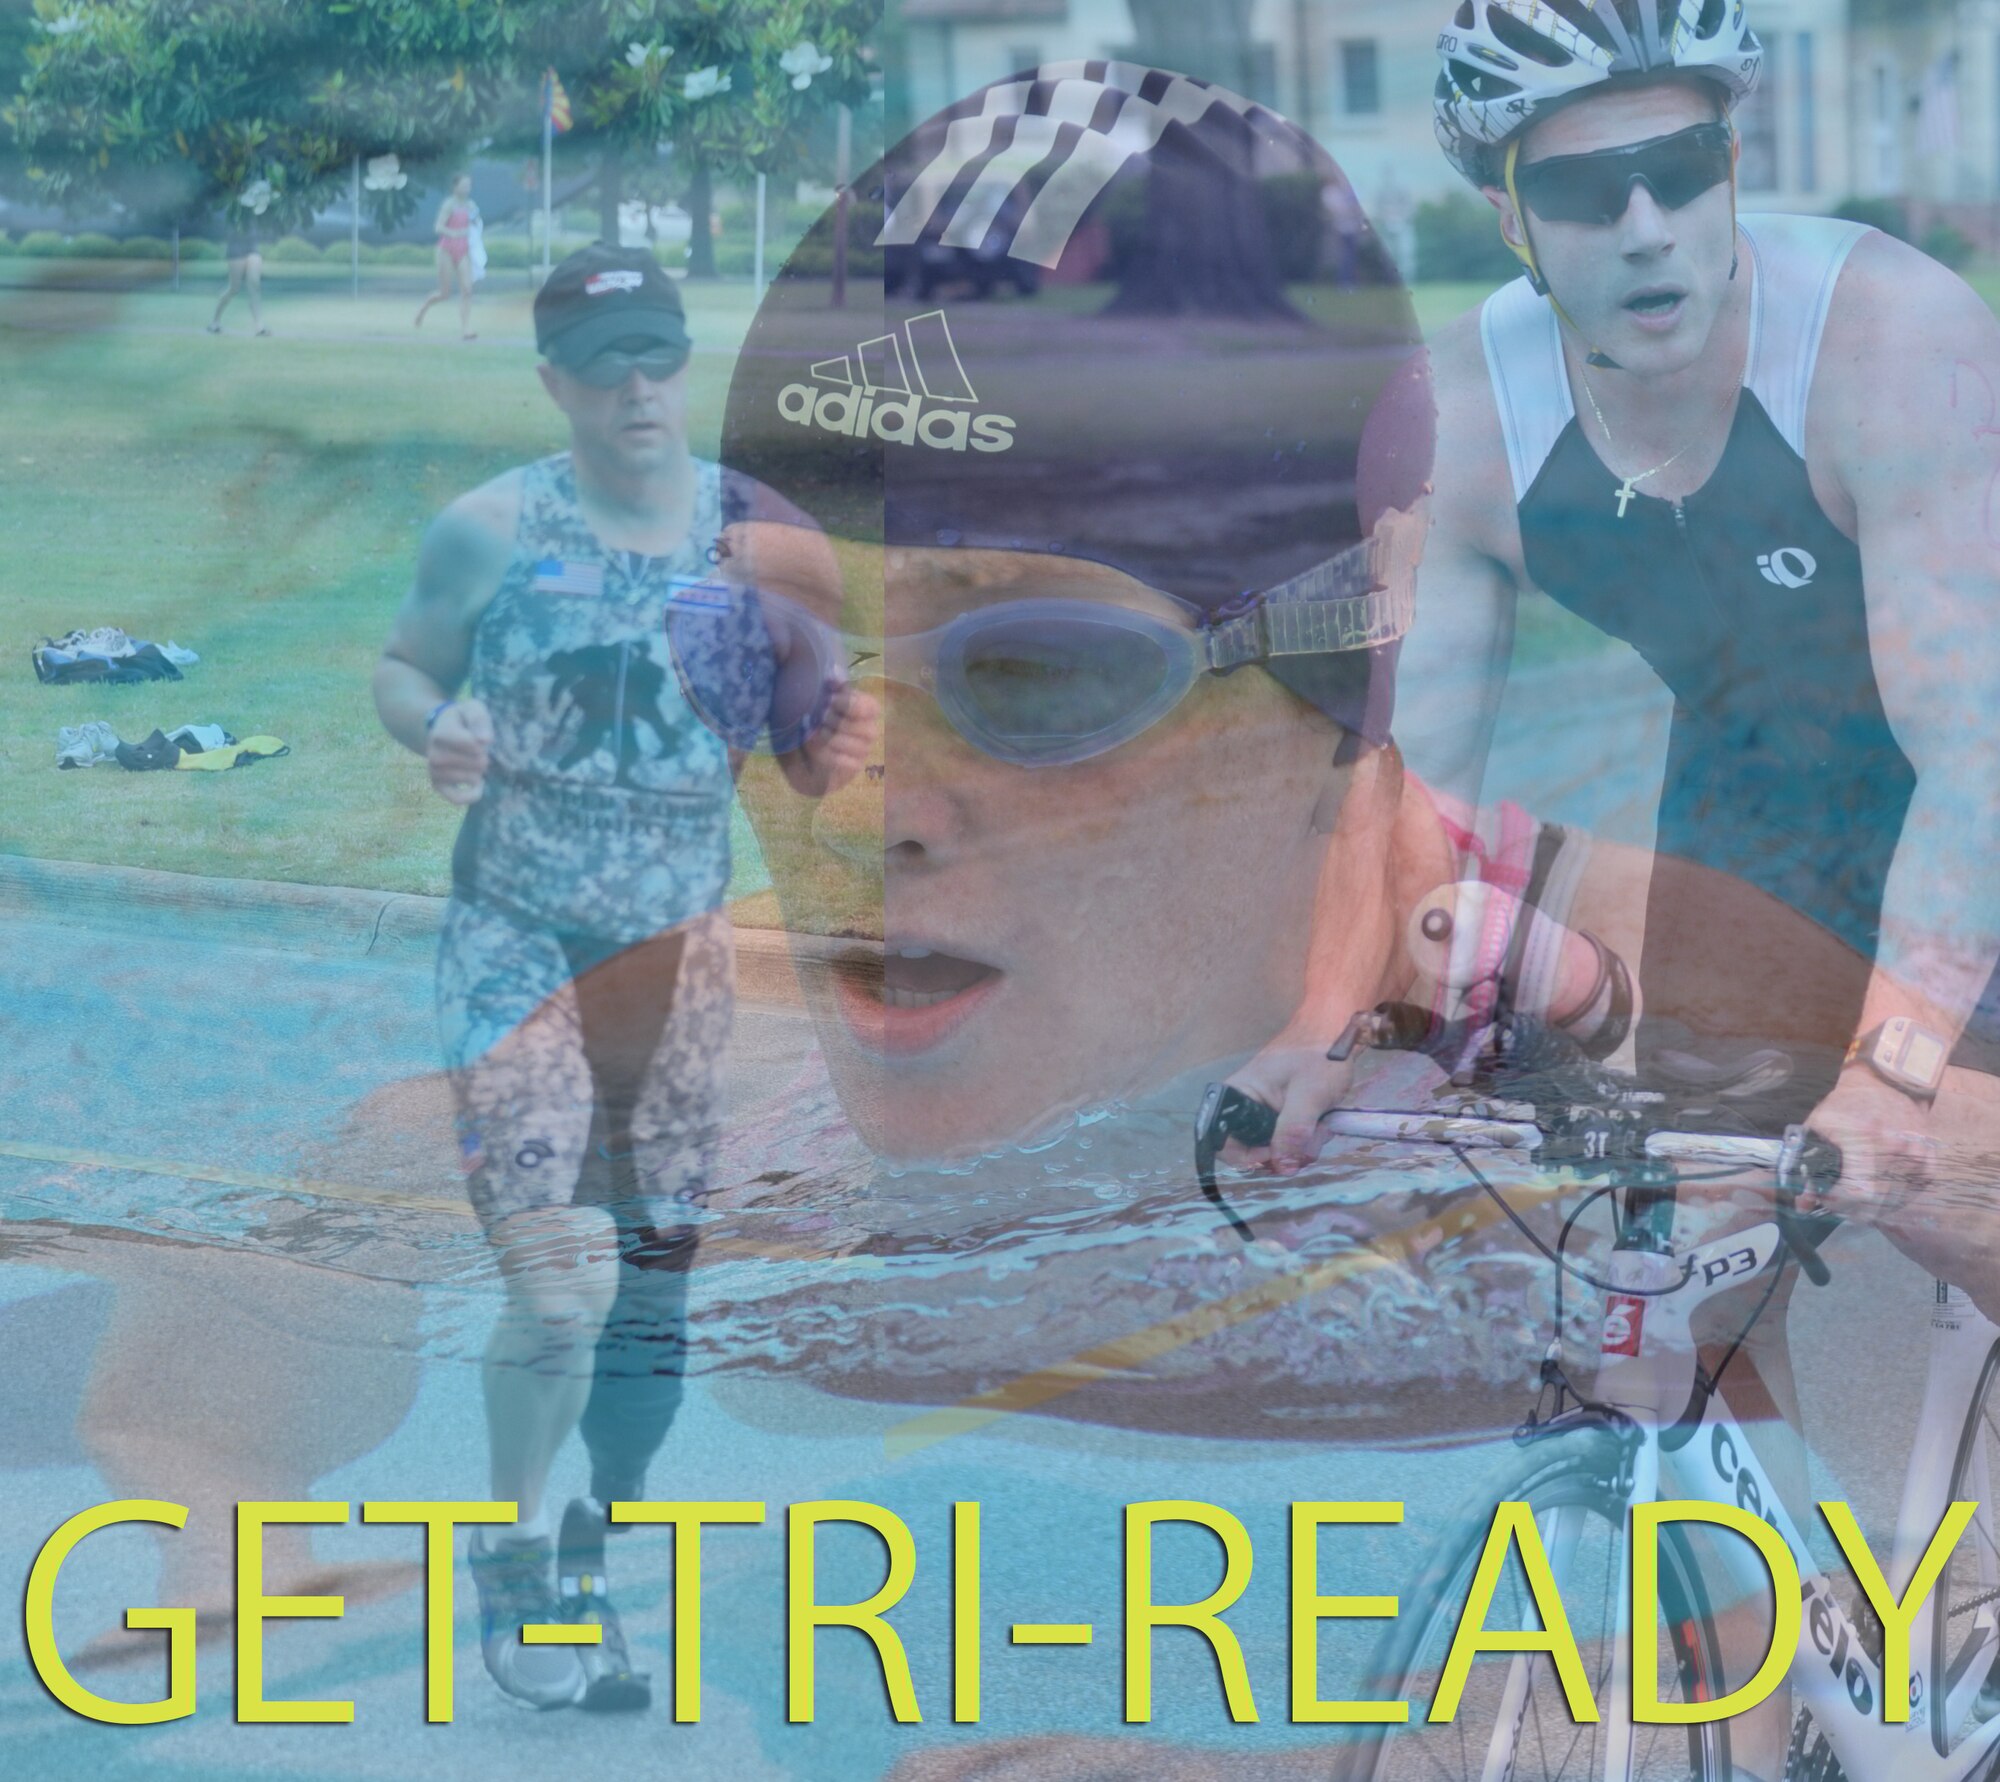 A training class started on Maxwell Air Force Base to prepare participants to take part in a triathlon hosted on base, Sept. 11, 2015.Participants can test their readiness for the endurance race at no cost, with multiple class levels. (U.S. Air Force image by Senior Airman William Blankenship
